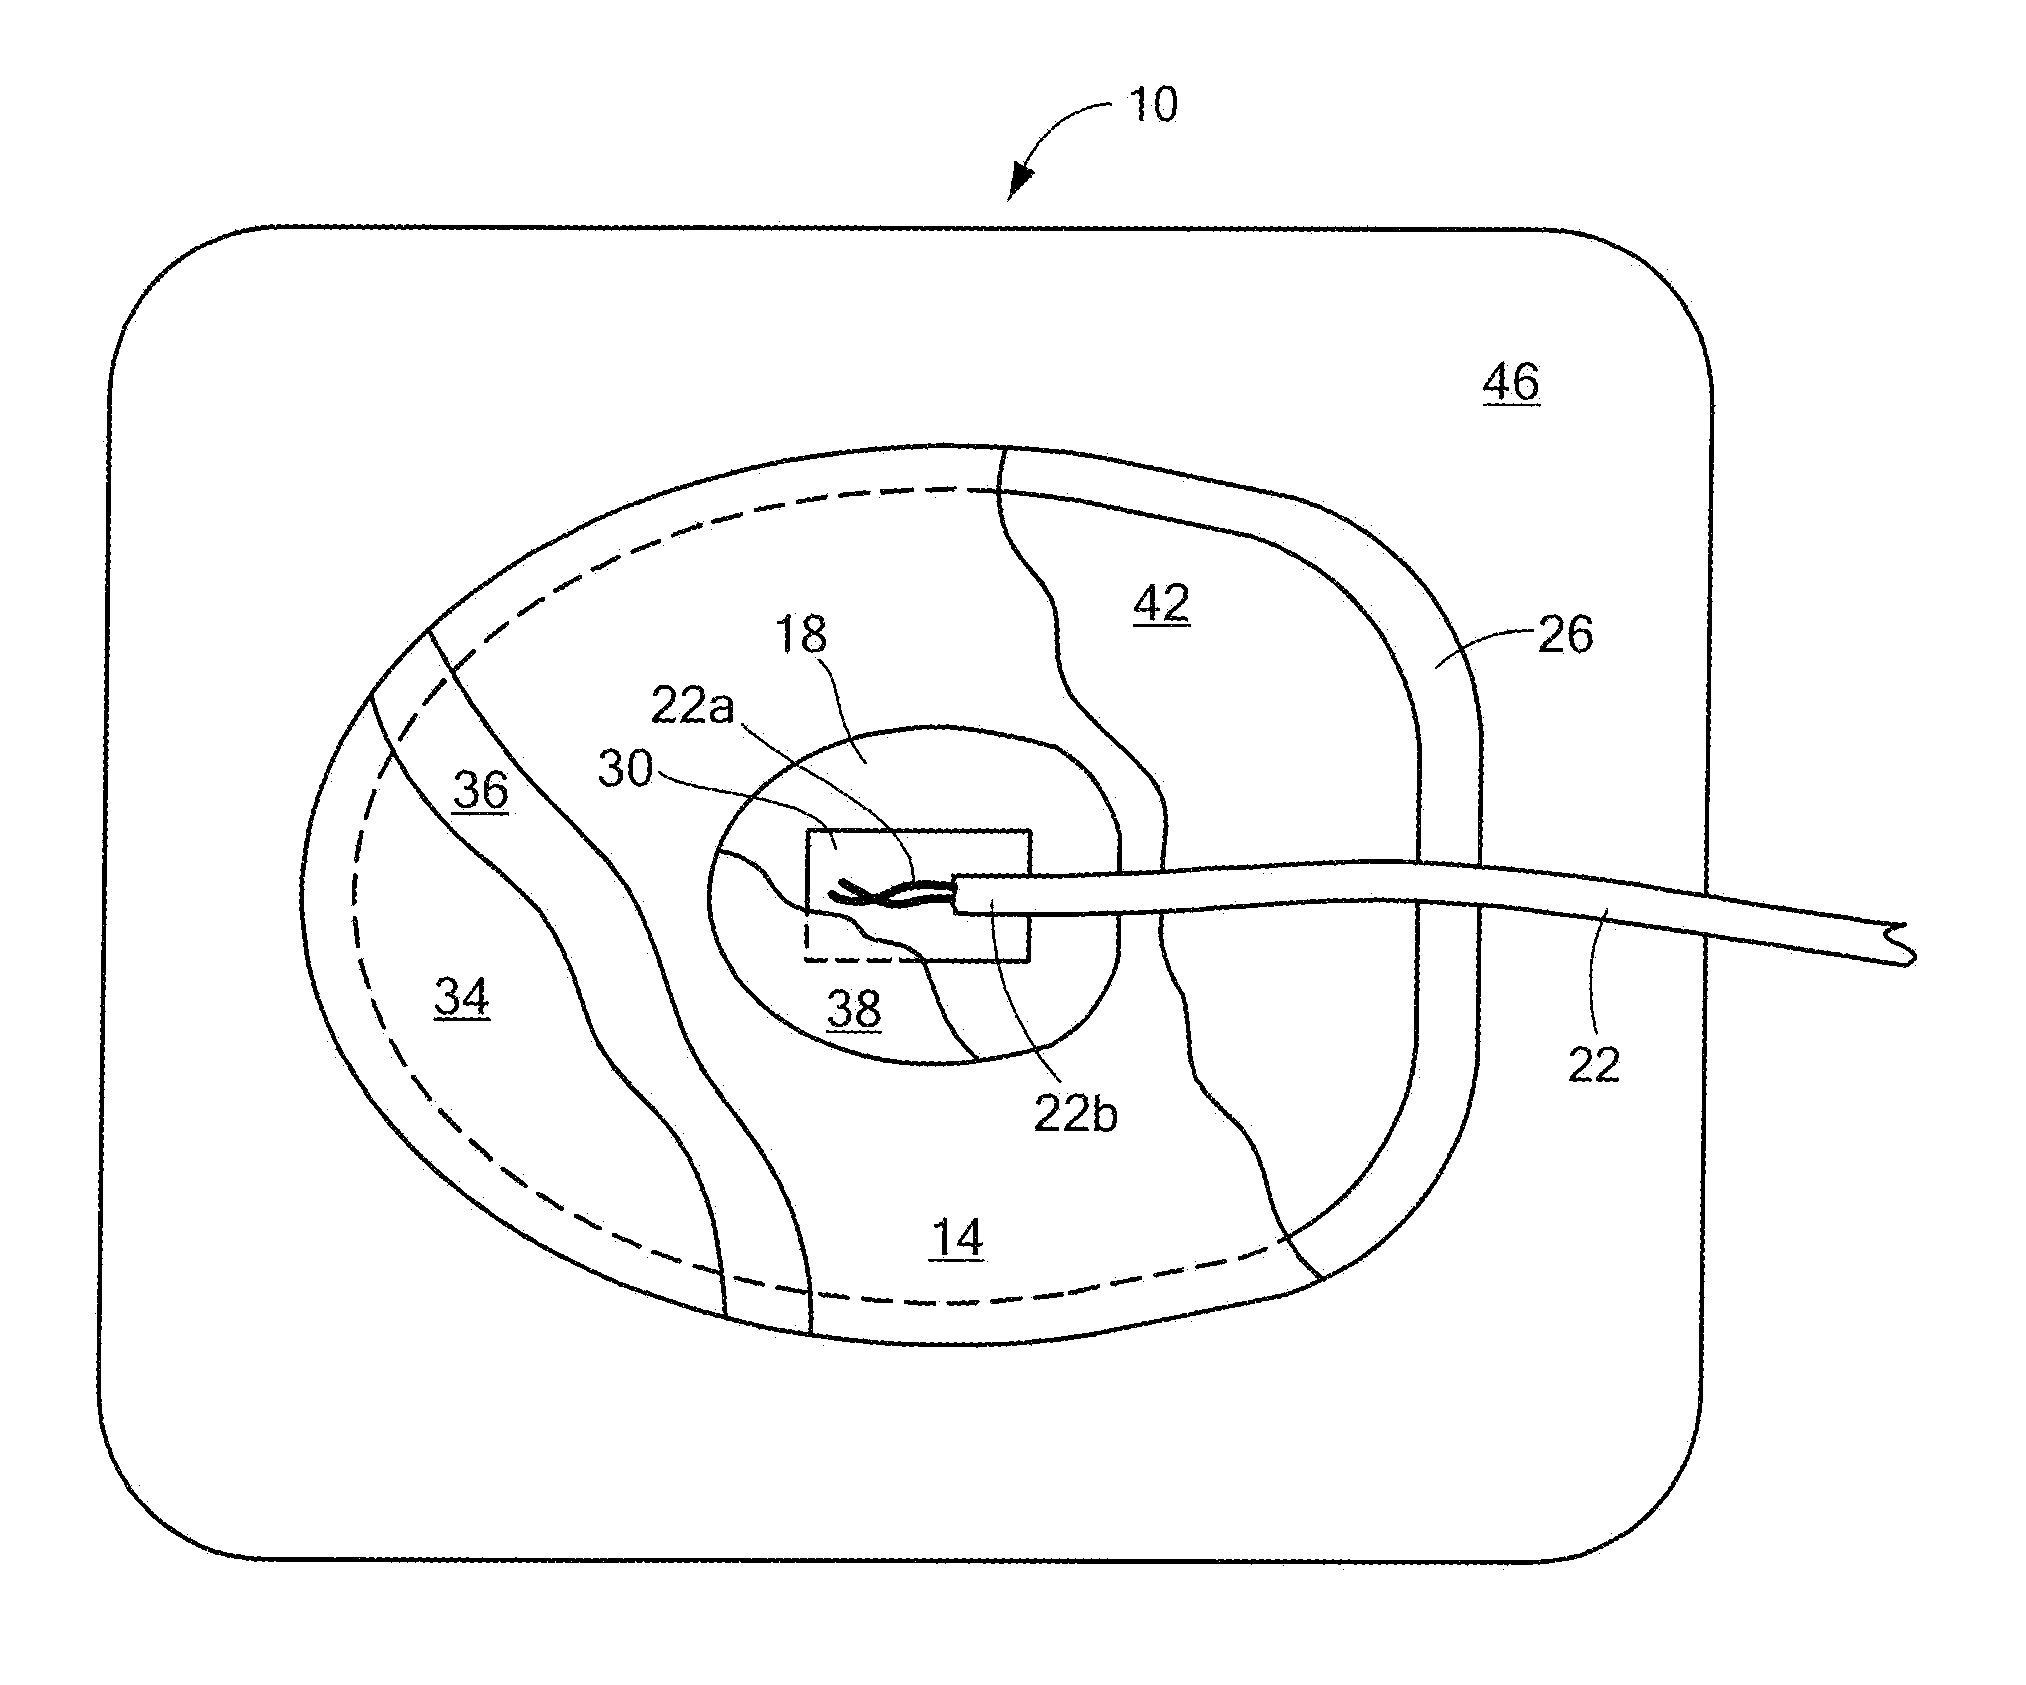 Apparatus and method for energy distribution in a medical electrode